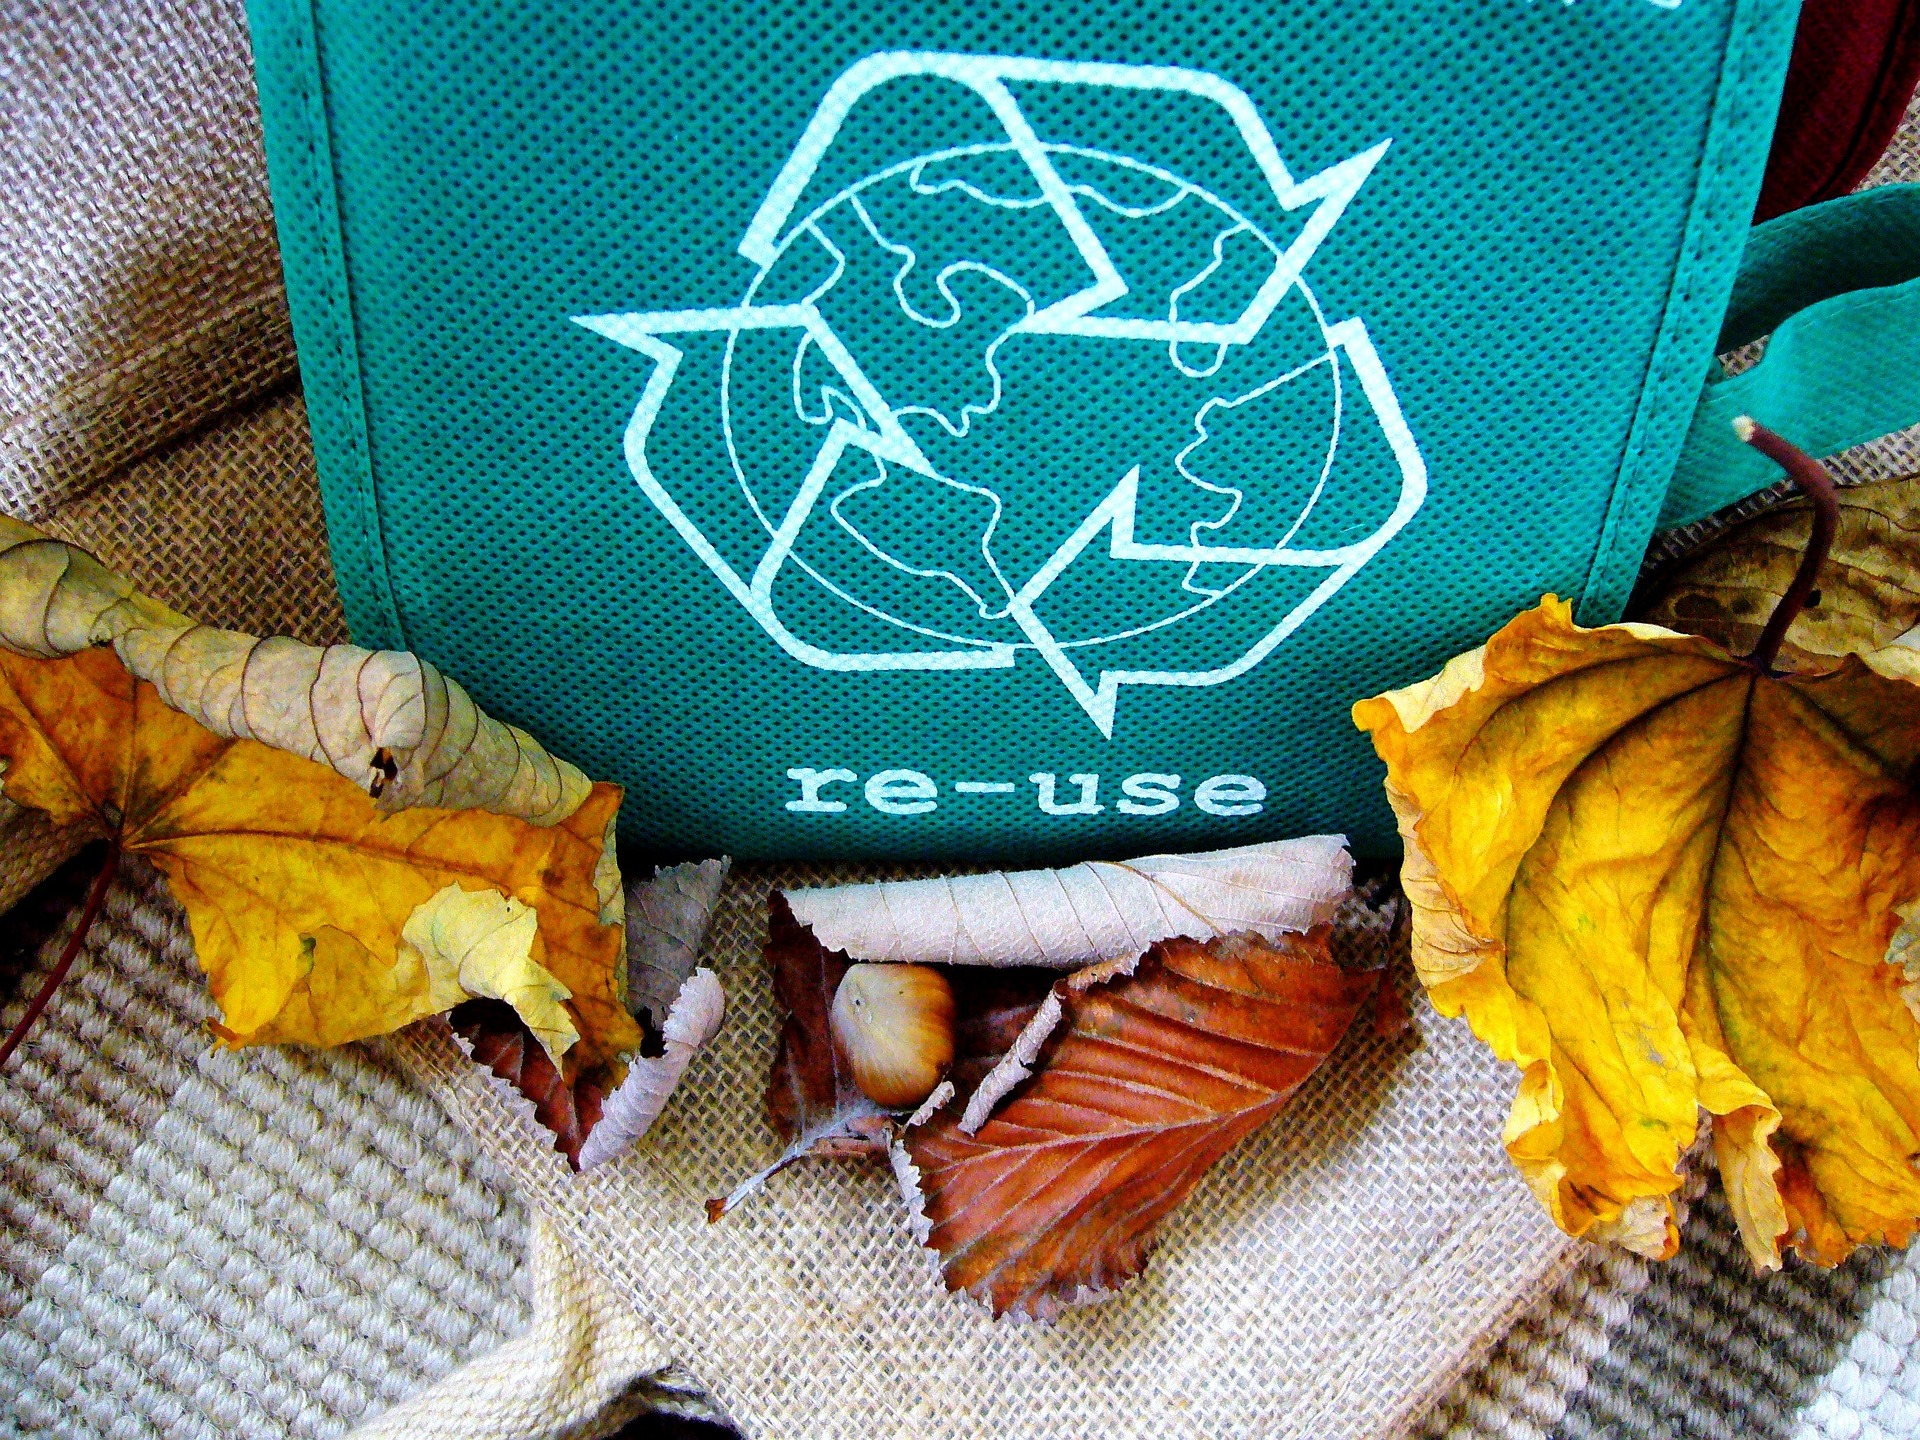 A reusable cloth bag sitting on a cloth with leaves. The bag has a recycling symbol and the phrase "re-use" written on it